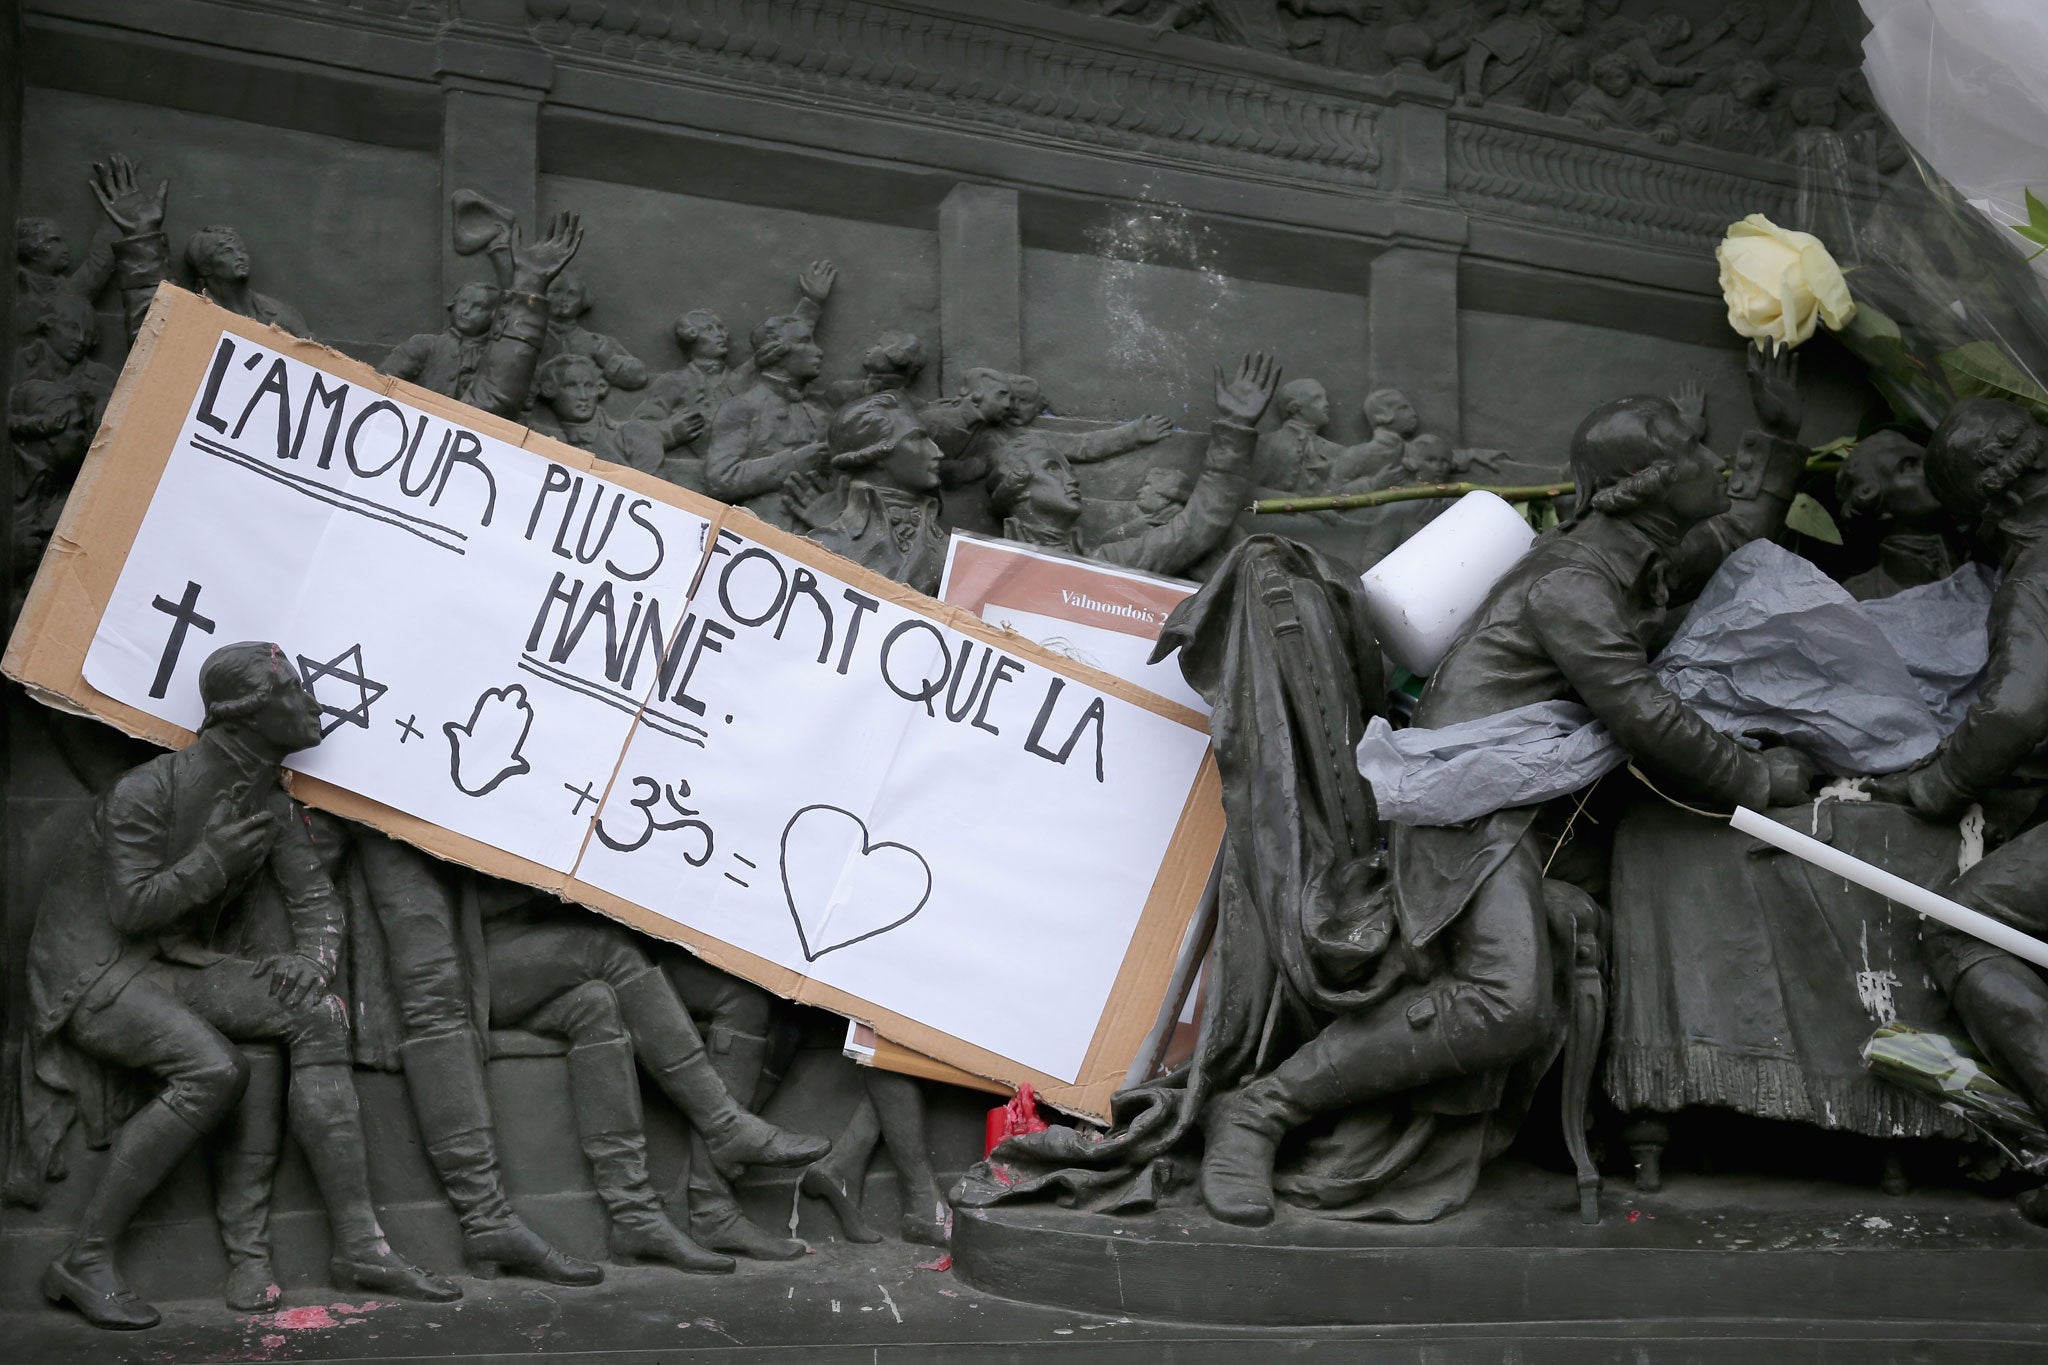 Tributes to the victims of the recent terror attacks in France adorn the reliefs surrounding the monument at Place de la Republique